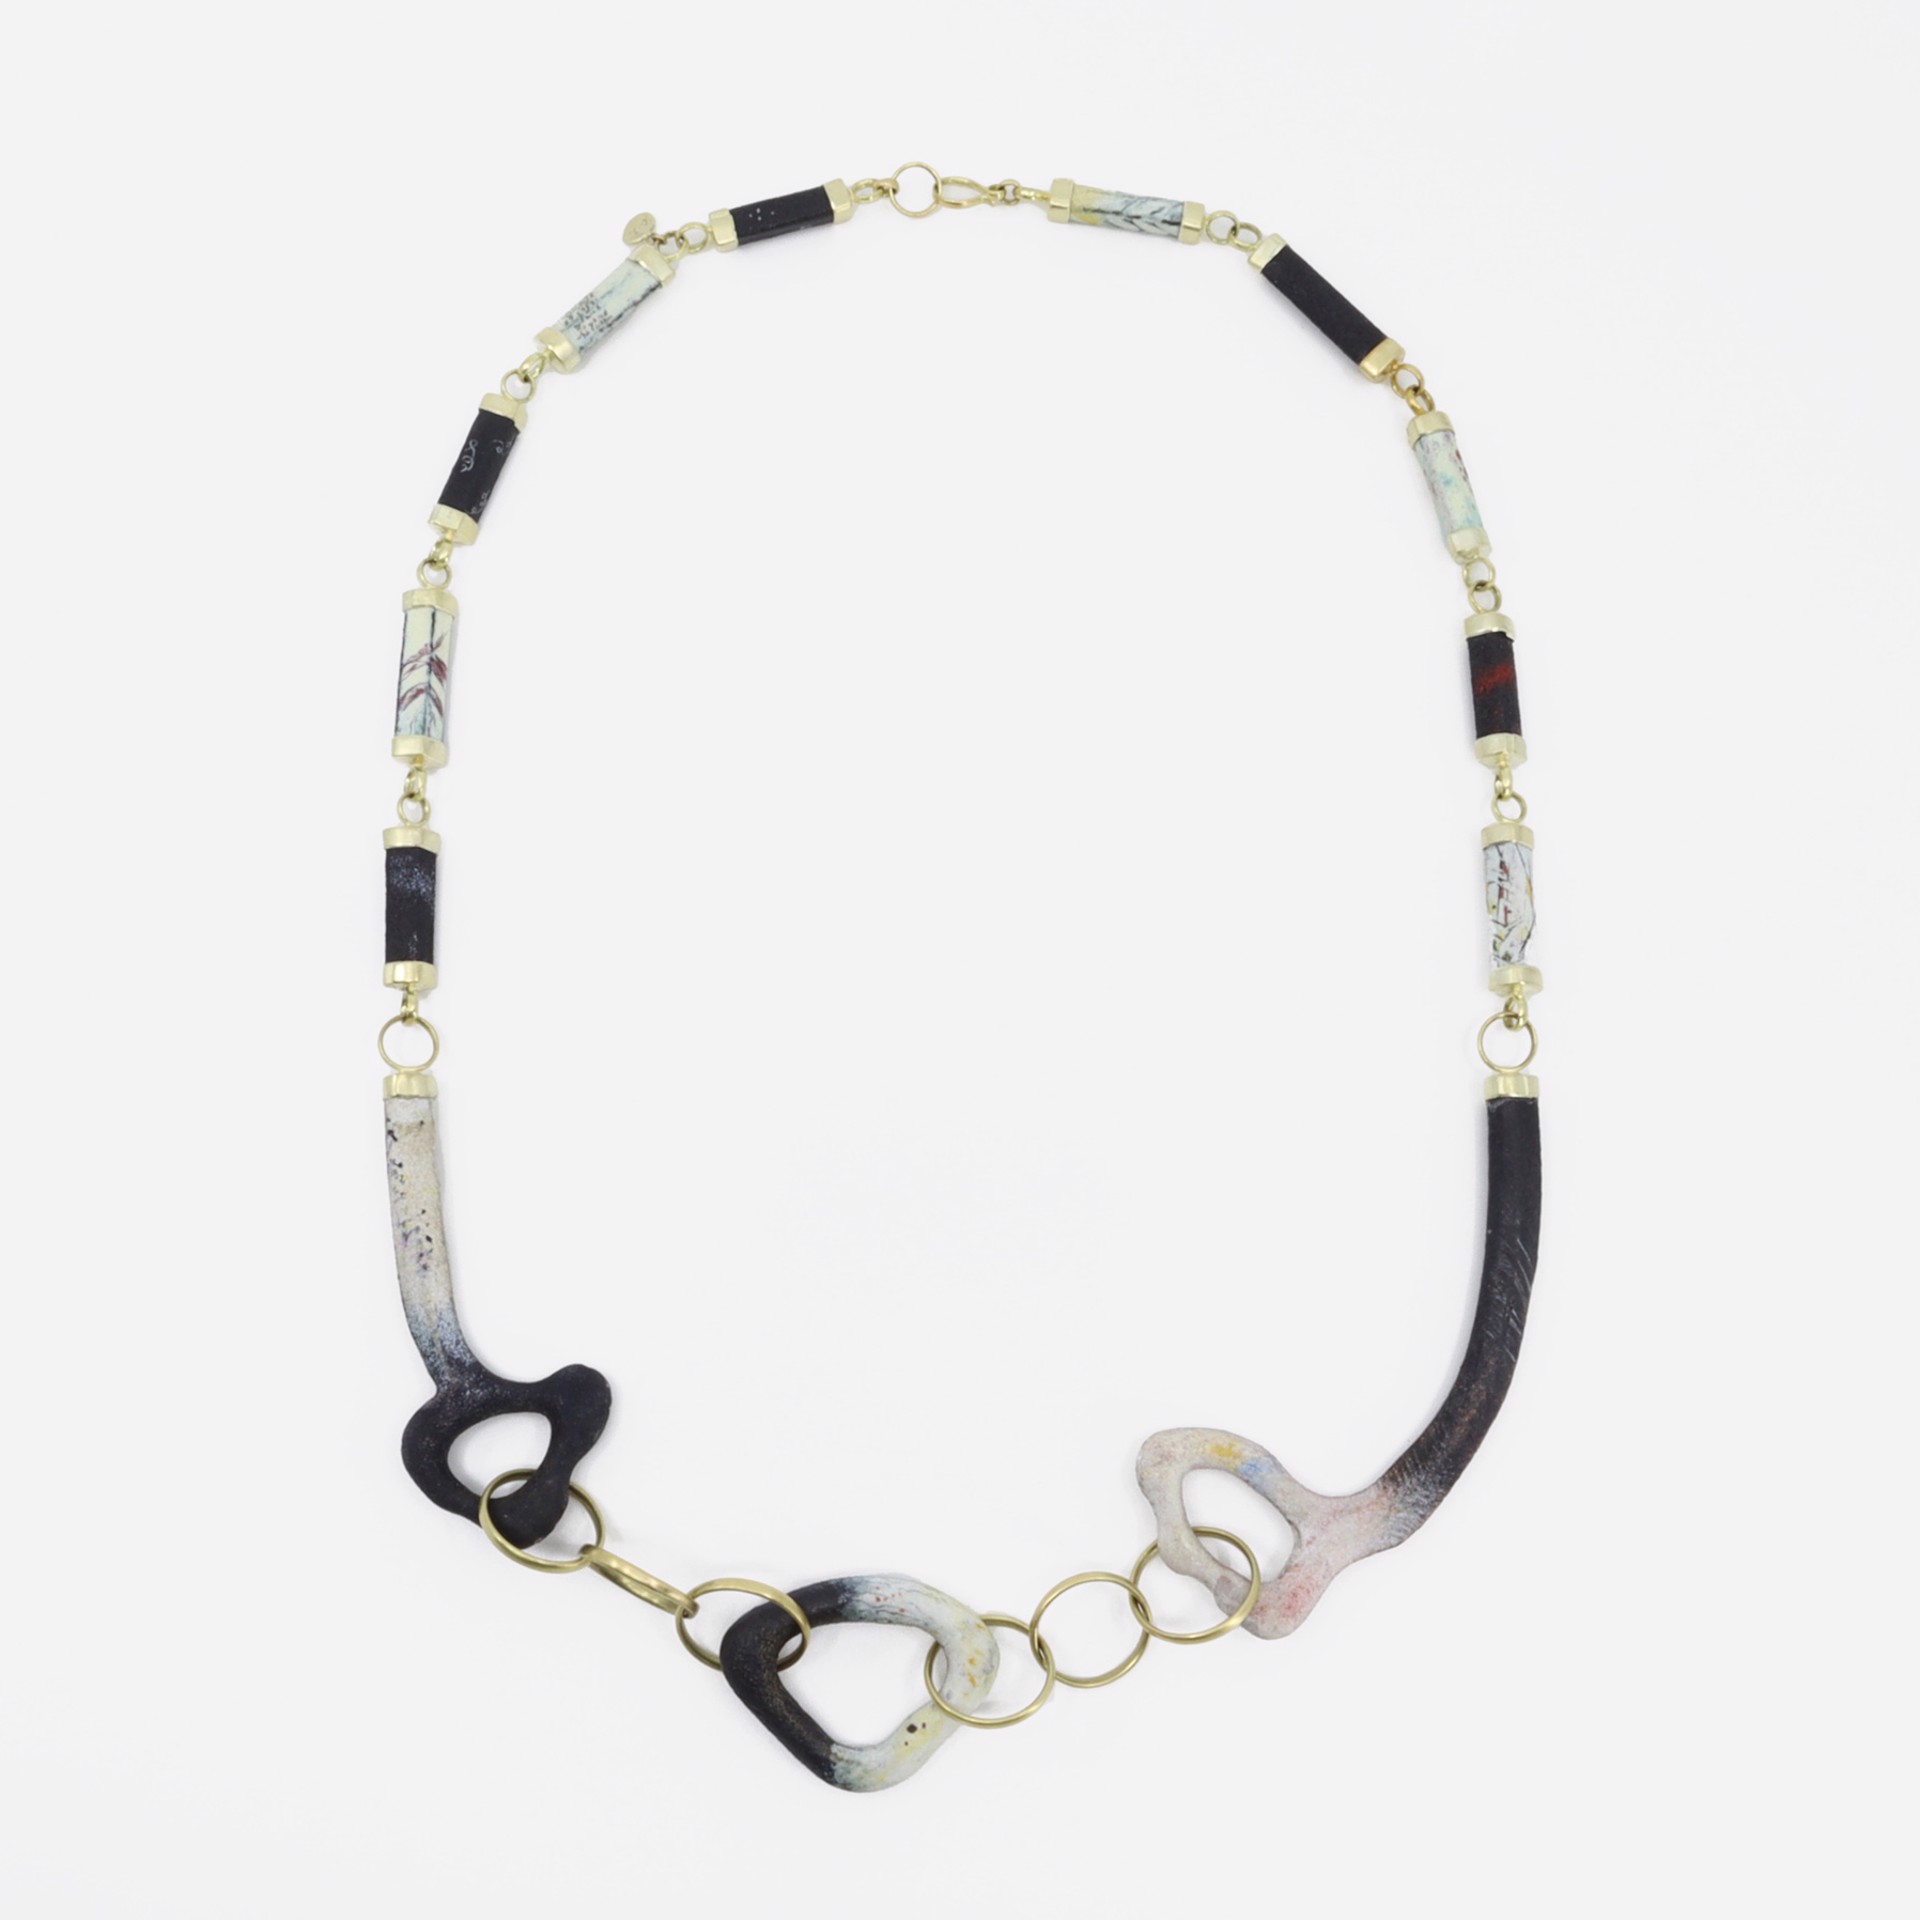 Among Etcetera No.18 (Necklace), 2010 by Jamie Bennett